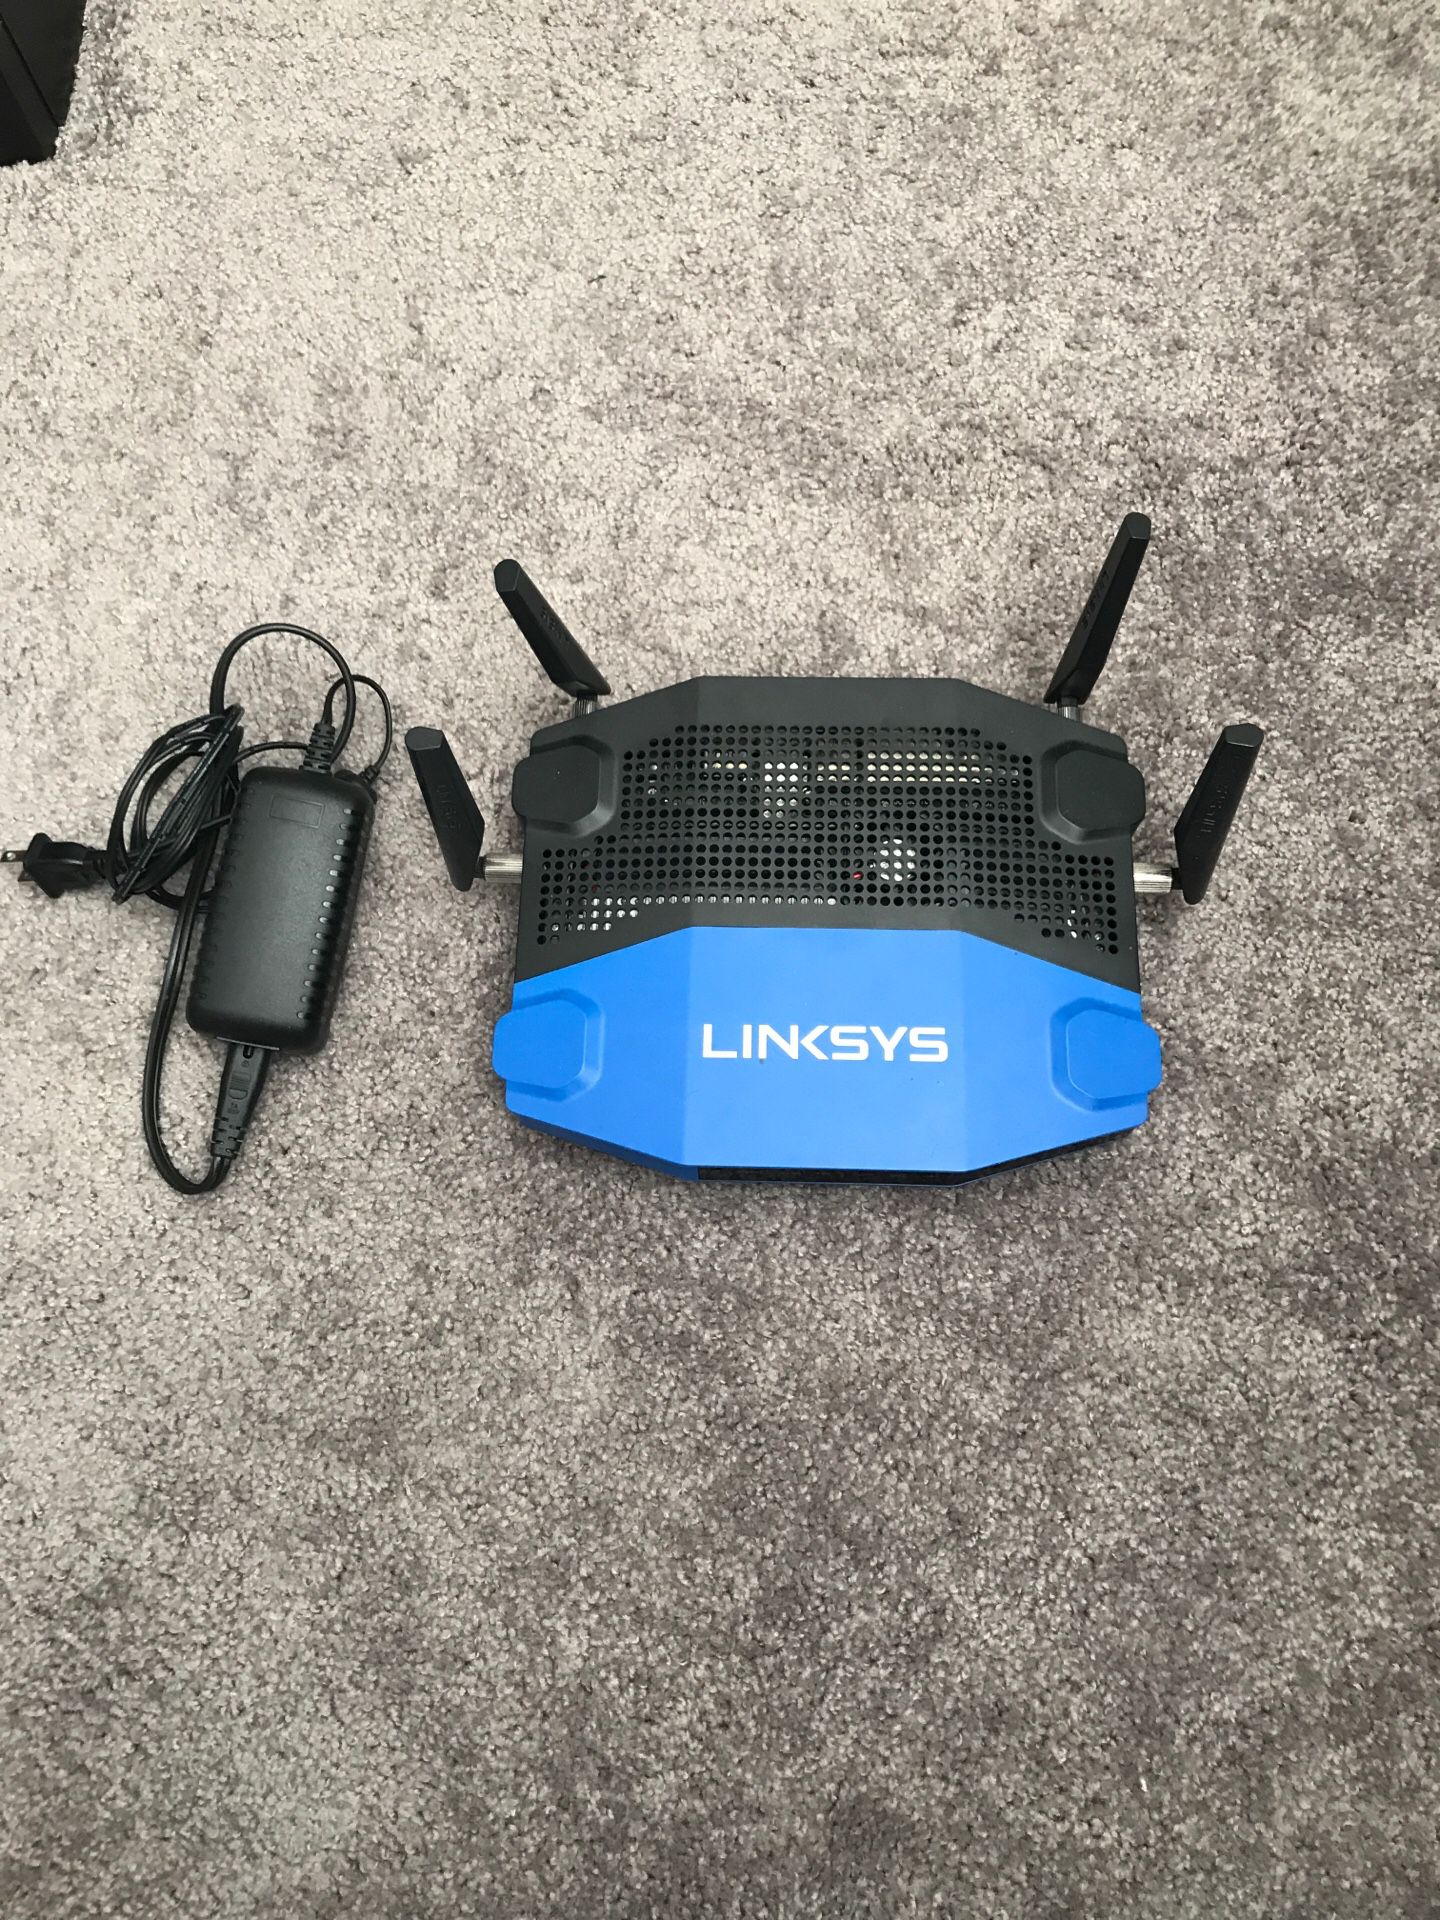 Linksys wrt1900 ac Router